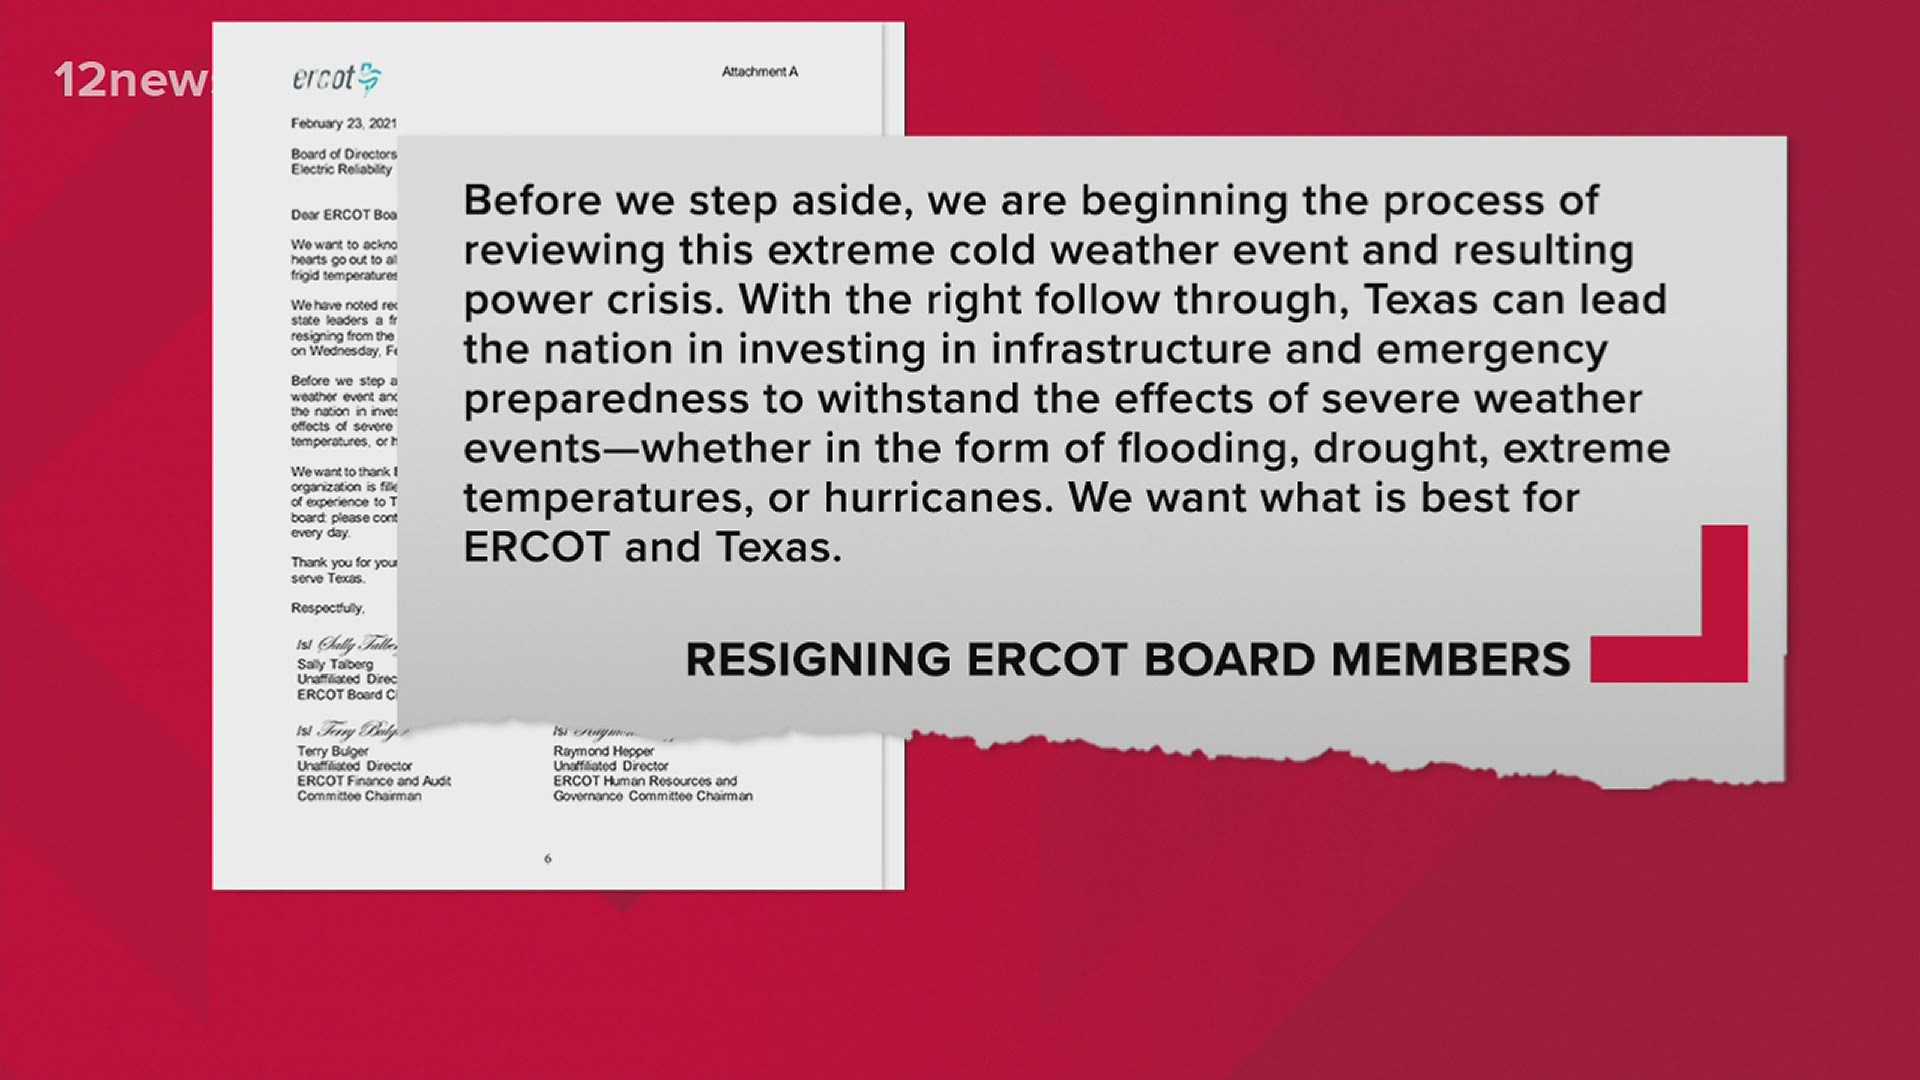 At least 5 board members have announced they're resigning following last week's winter storm that left millions of Texans in the dark and cold.